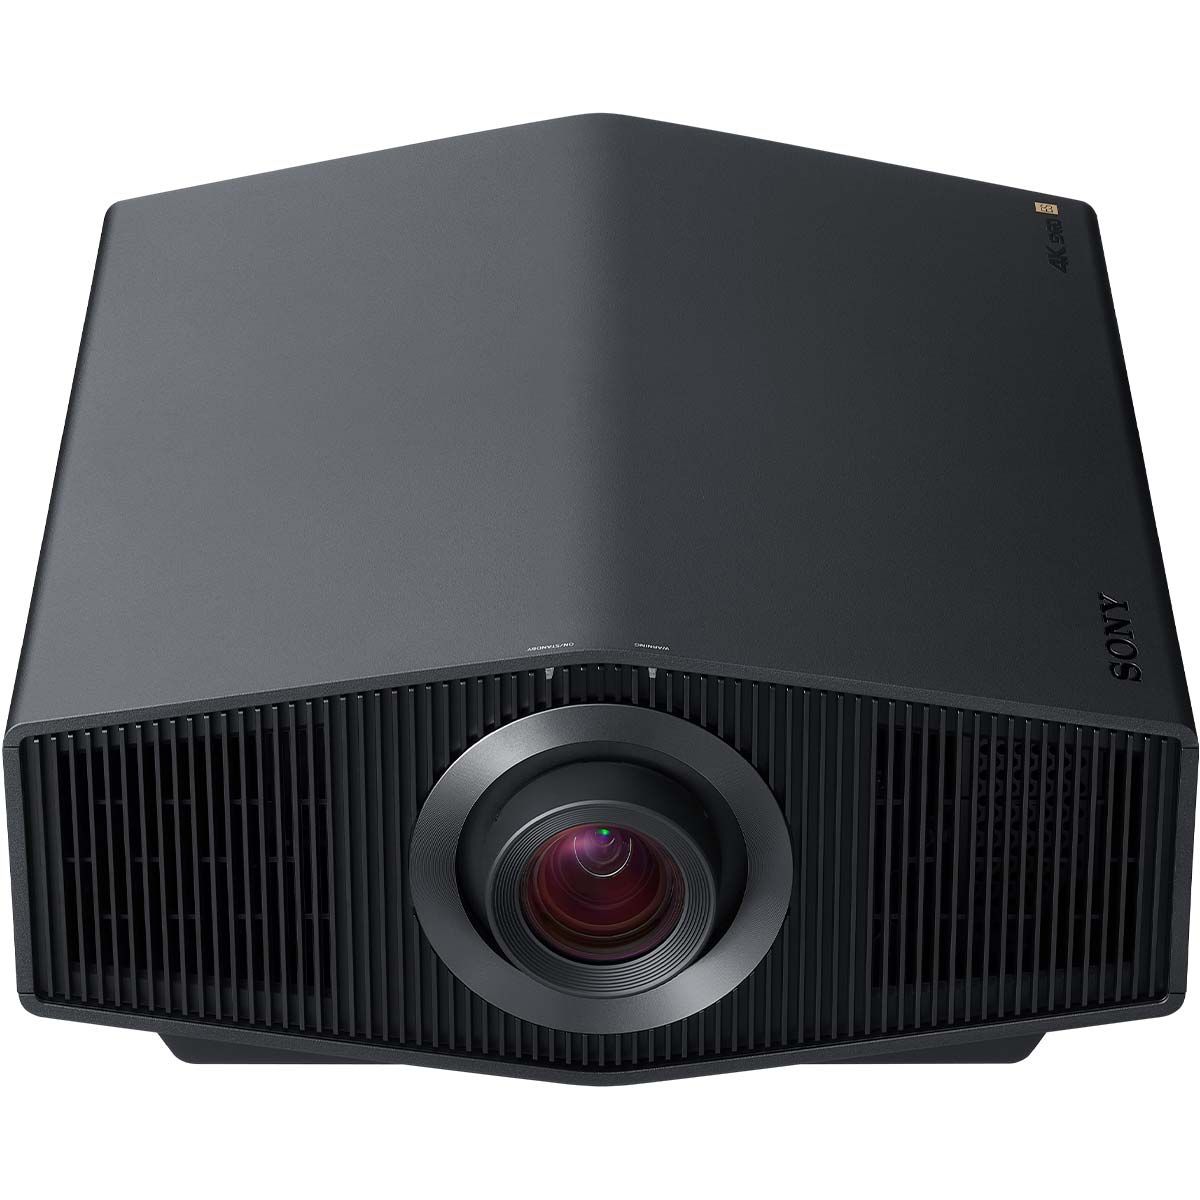 Sony VPL-XW7000ES Native 4K SXRD Laser Projector - black - angled front view